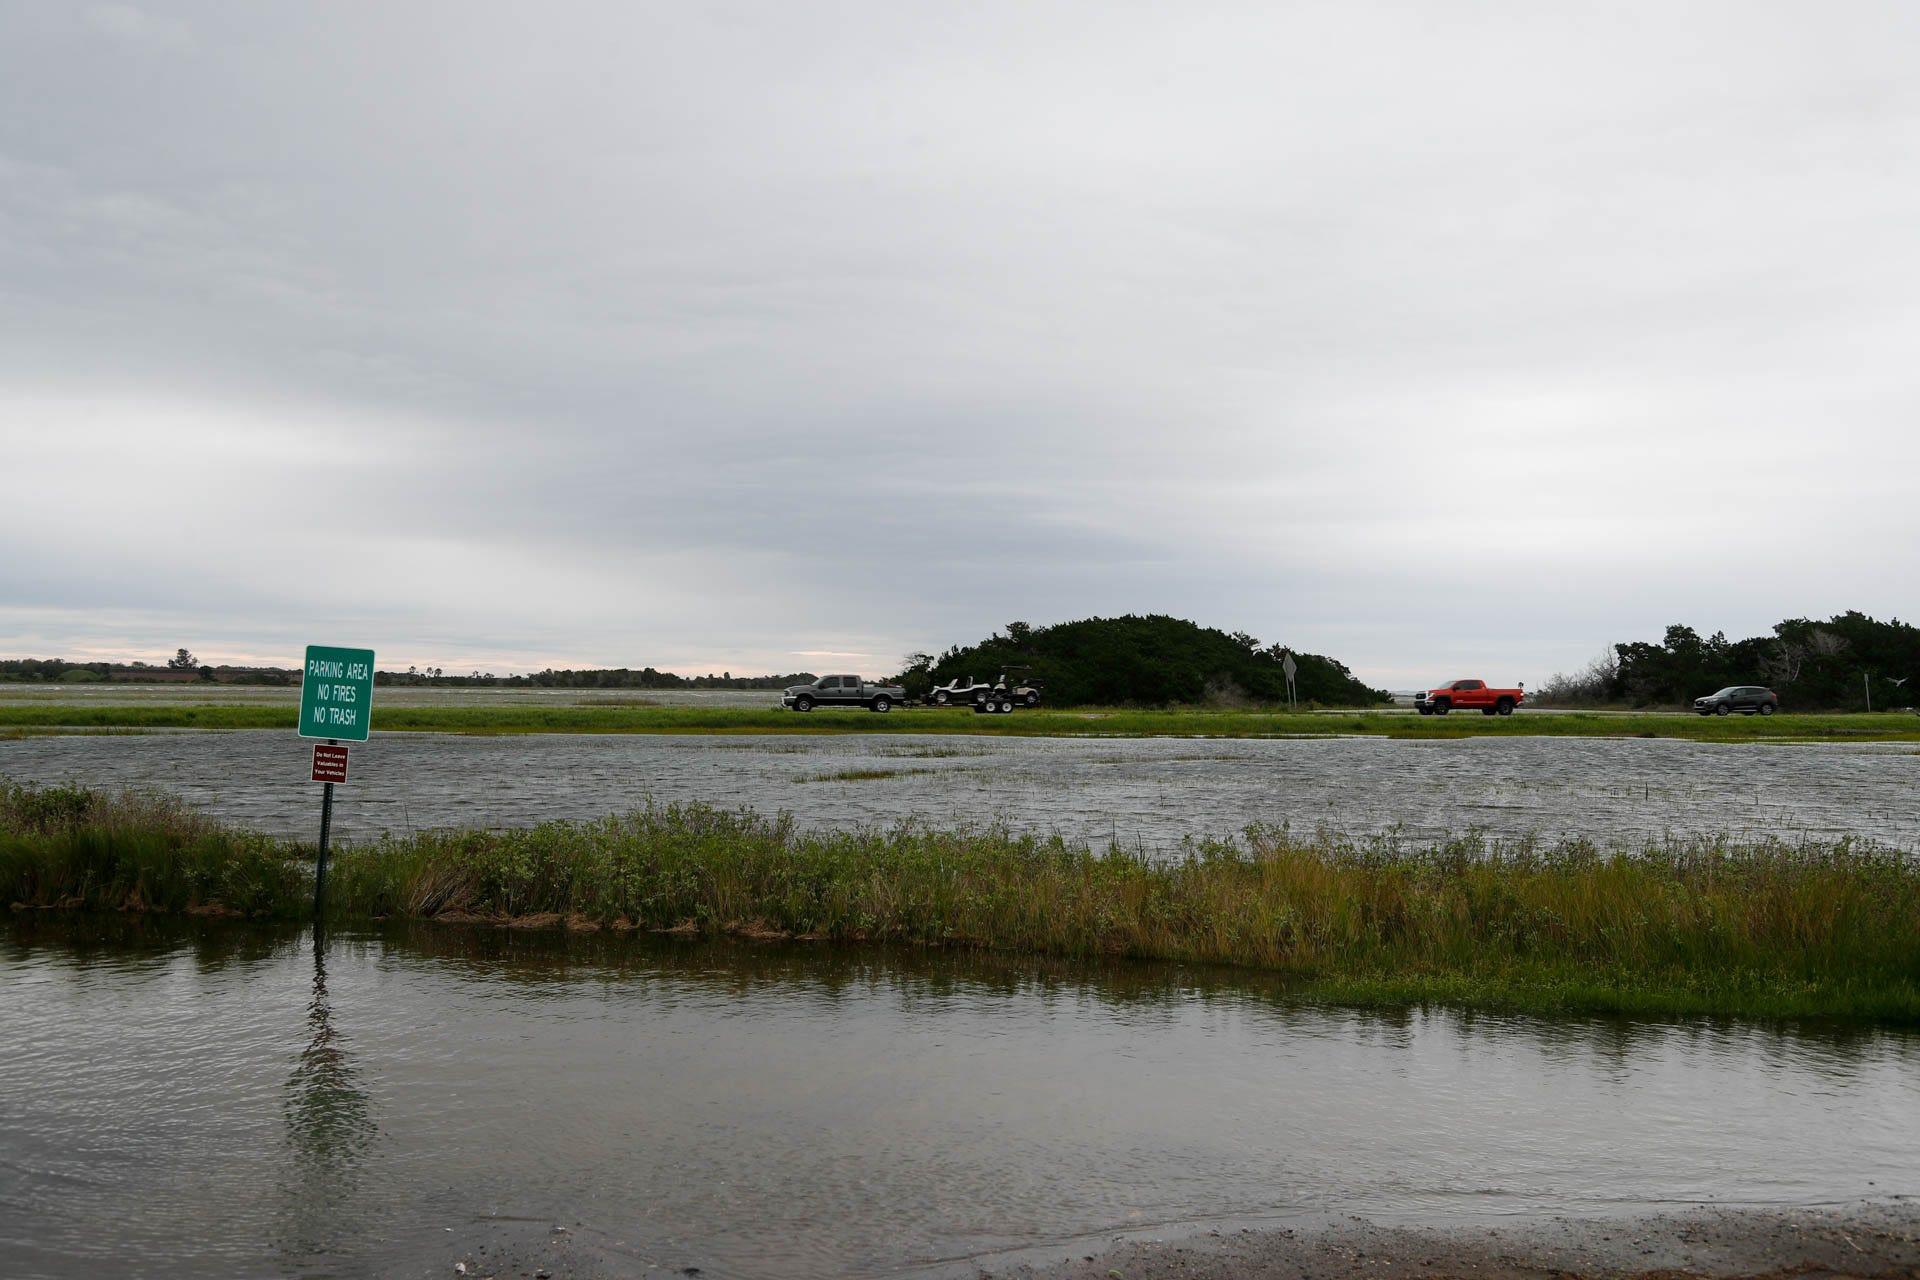 FILE: High winds and an extreme tide pushed the high tide to nearly flood Highway 80 on Thursday September 29, 2022 as Tybee Island feels the impact from Hurricane Ian. For coastal communities, flood and wind from storms can pose major threats during hurricane season.